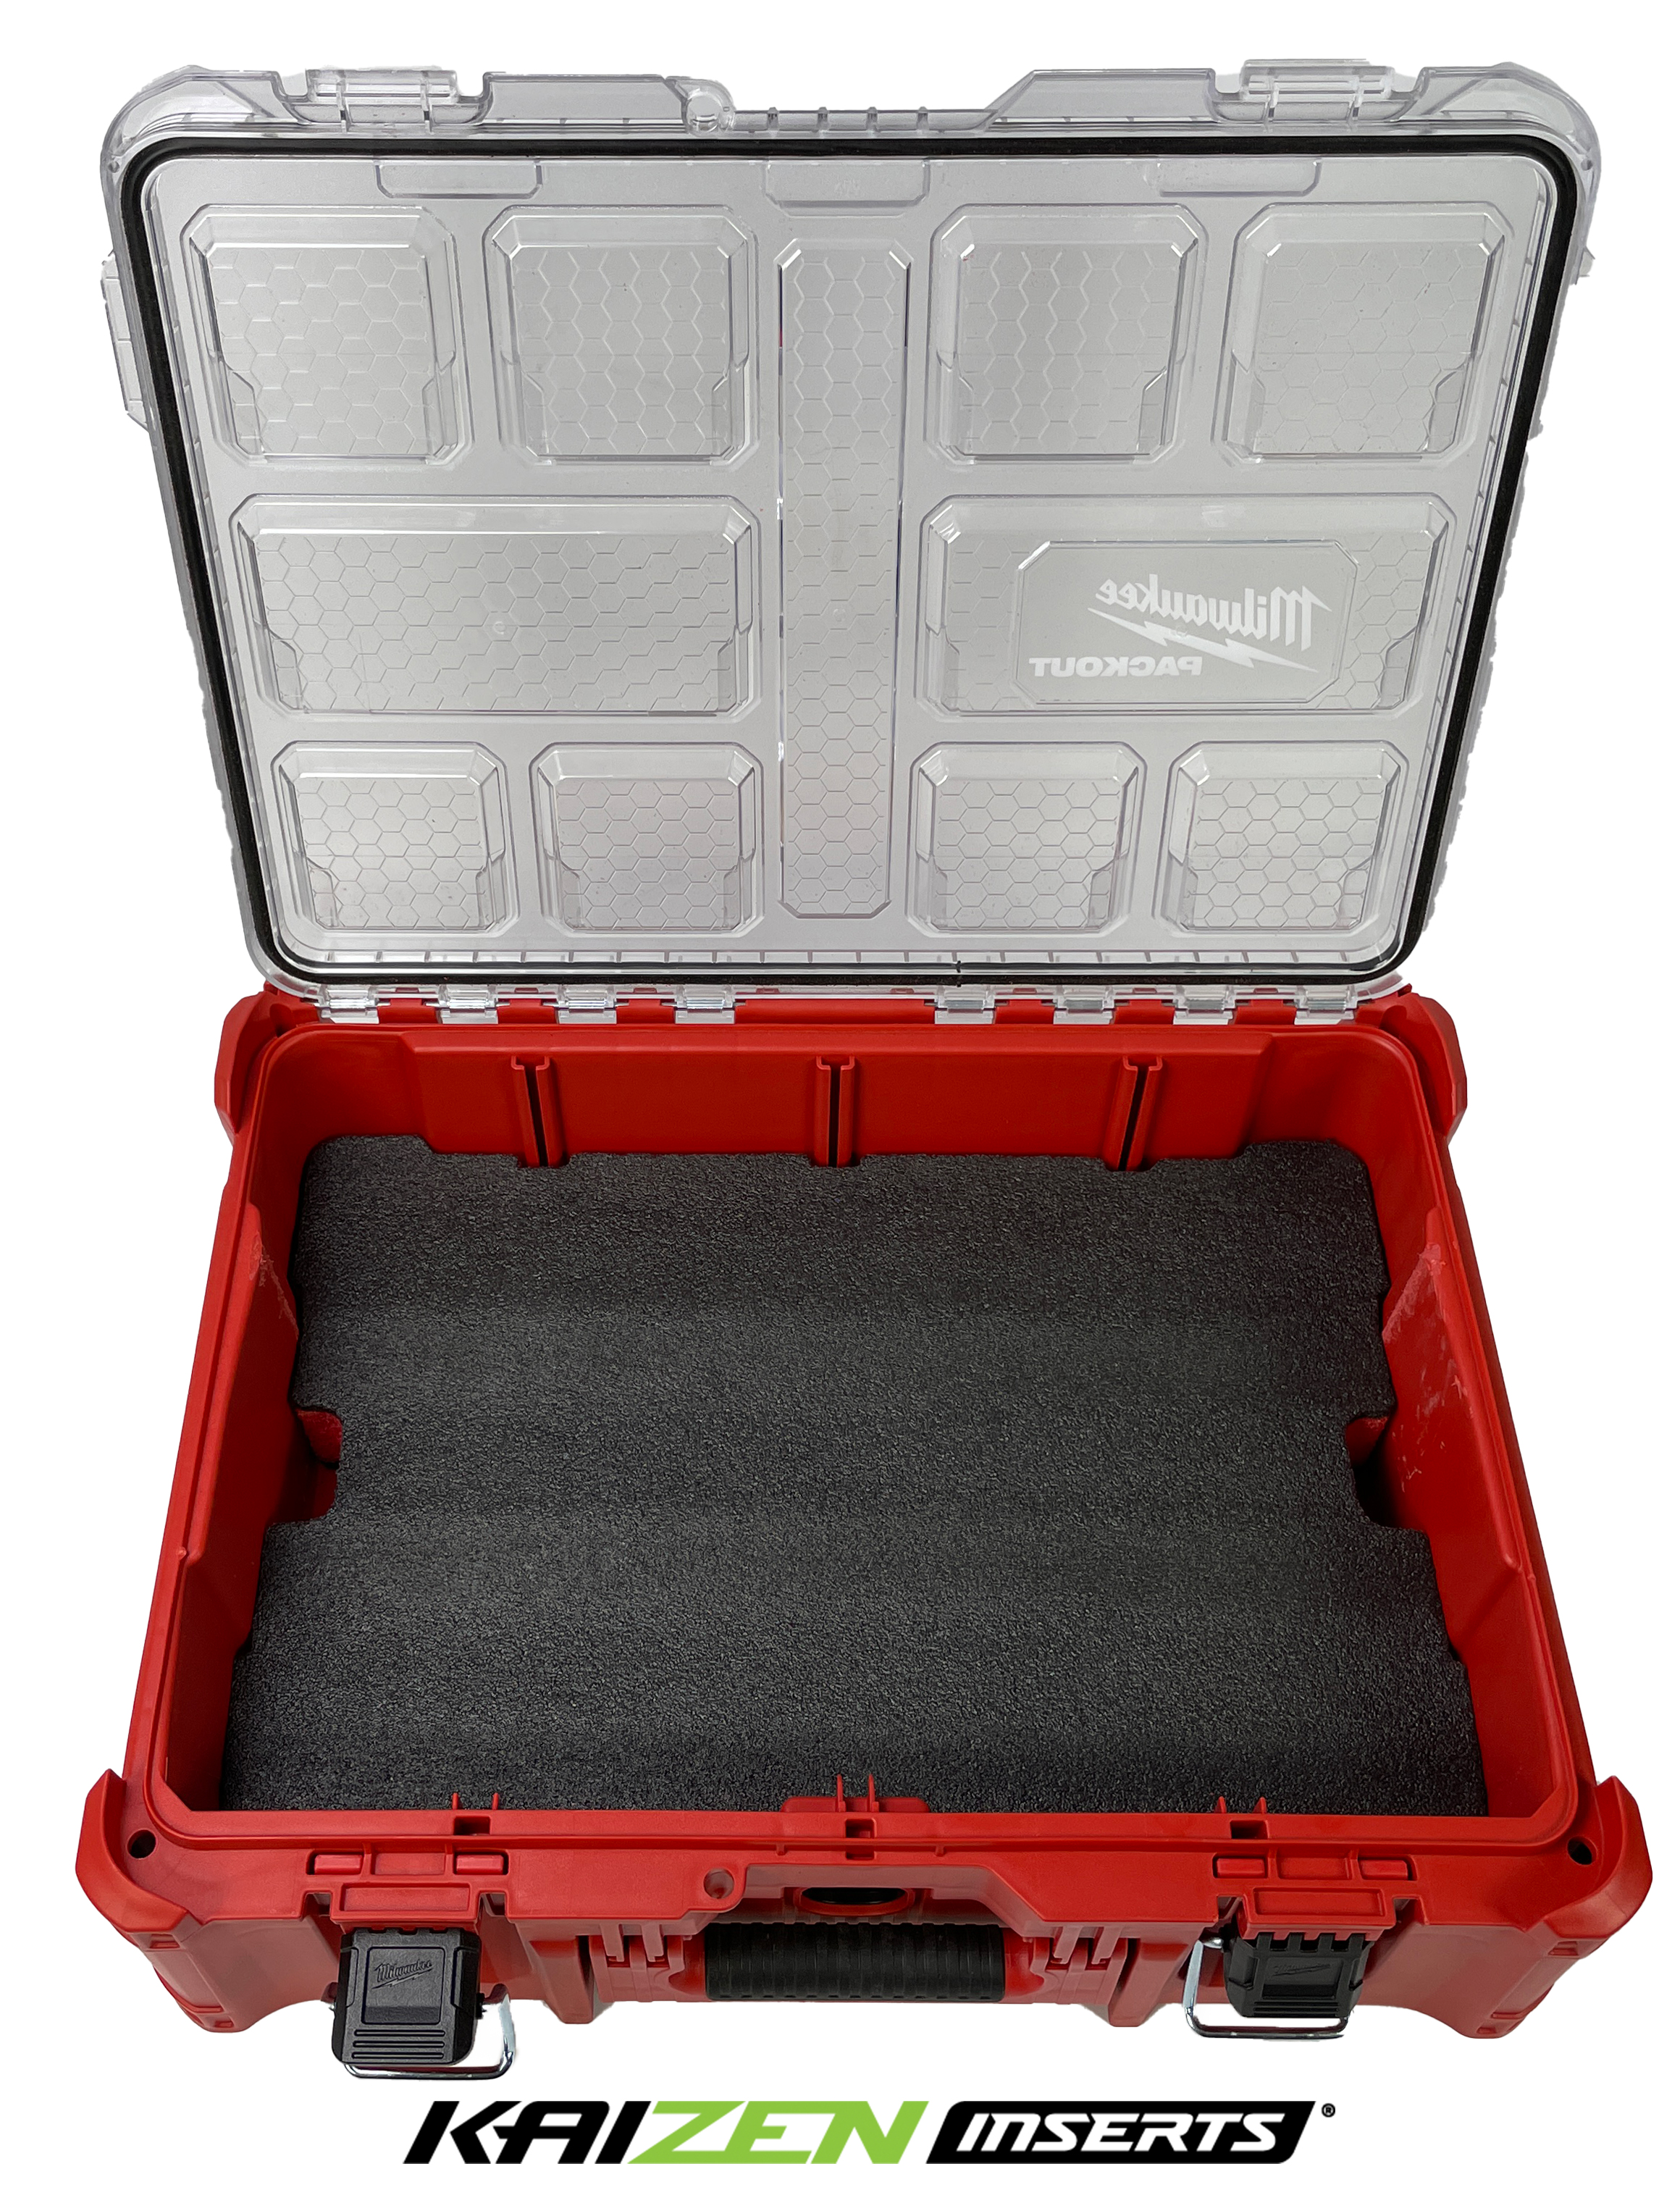 Kaizen Foam for Toolboxes and Storage Inserts